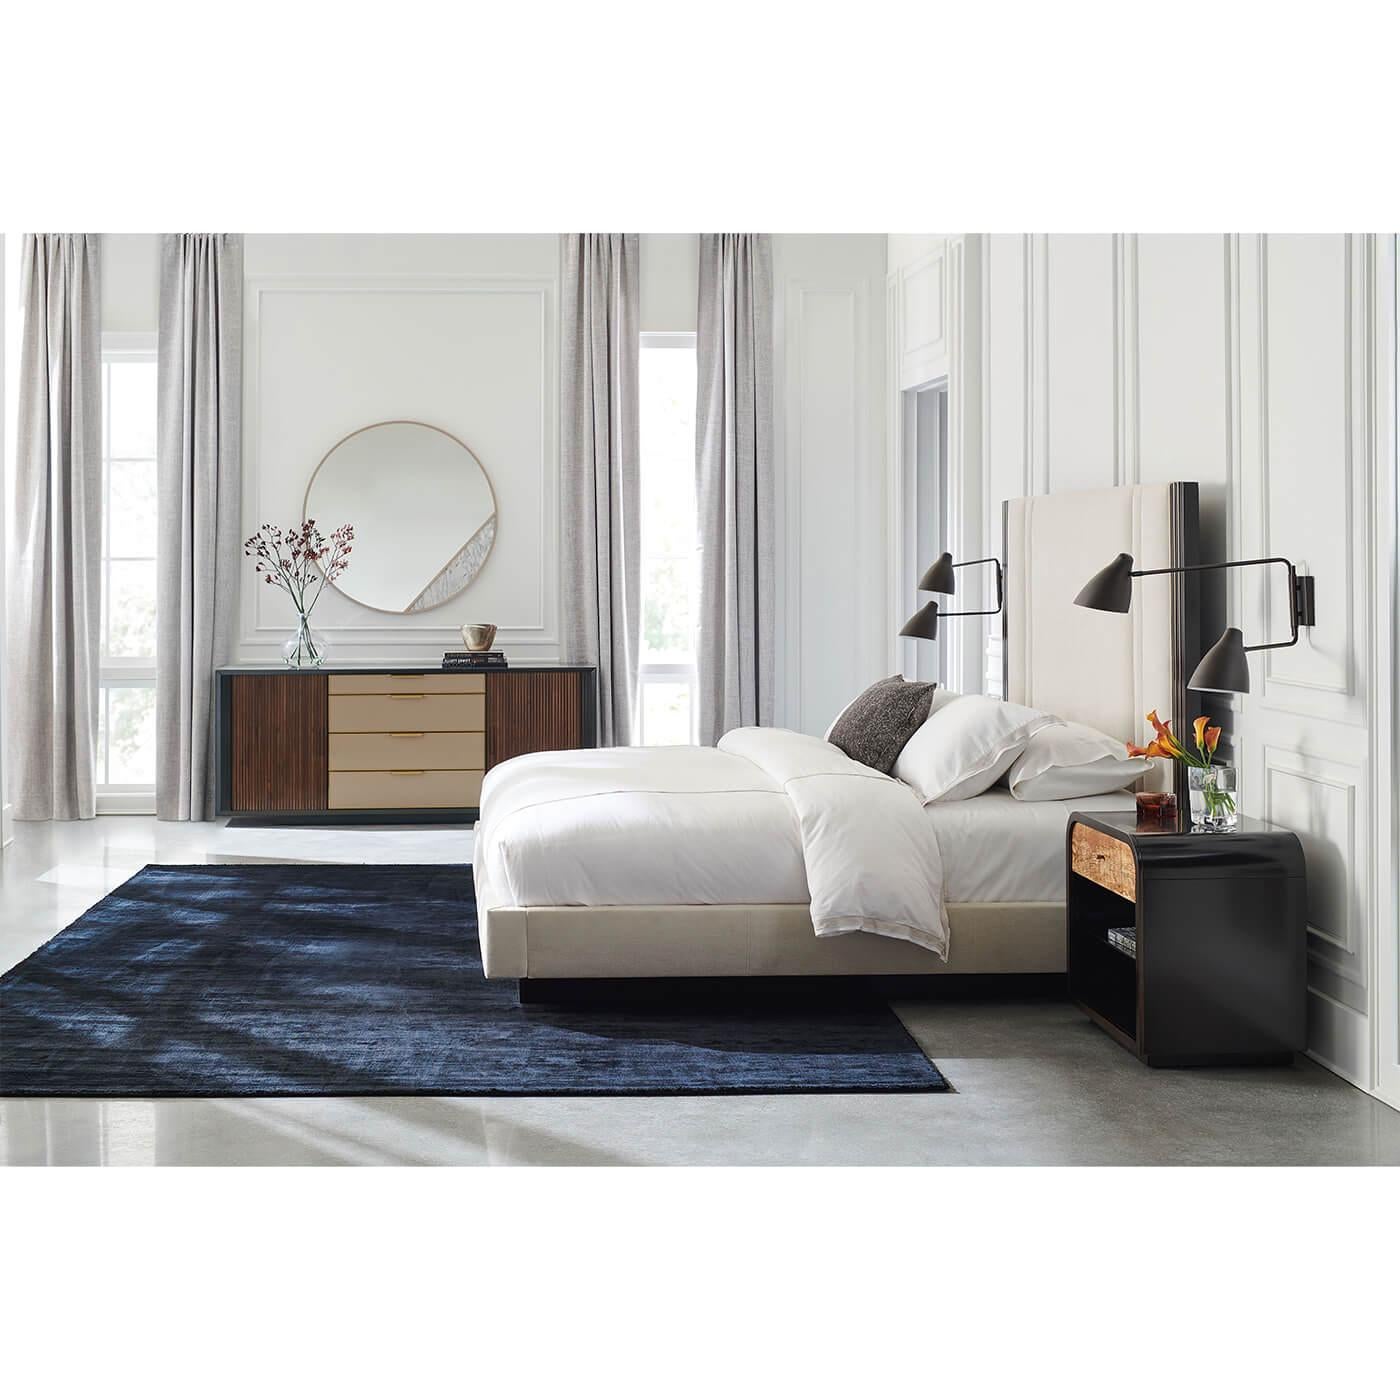 Asian Modern Parsons Style King Bed For Sale